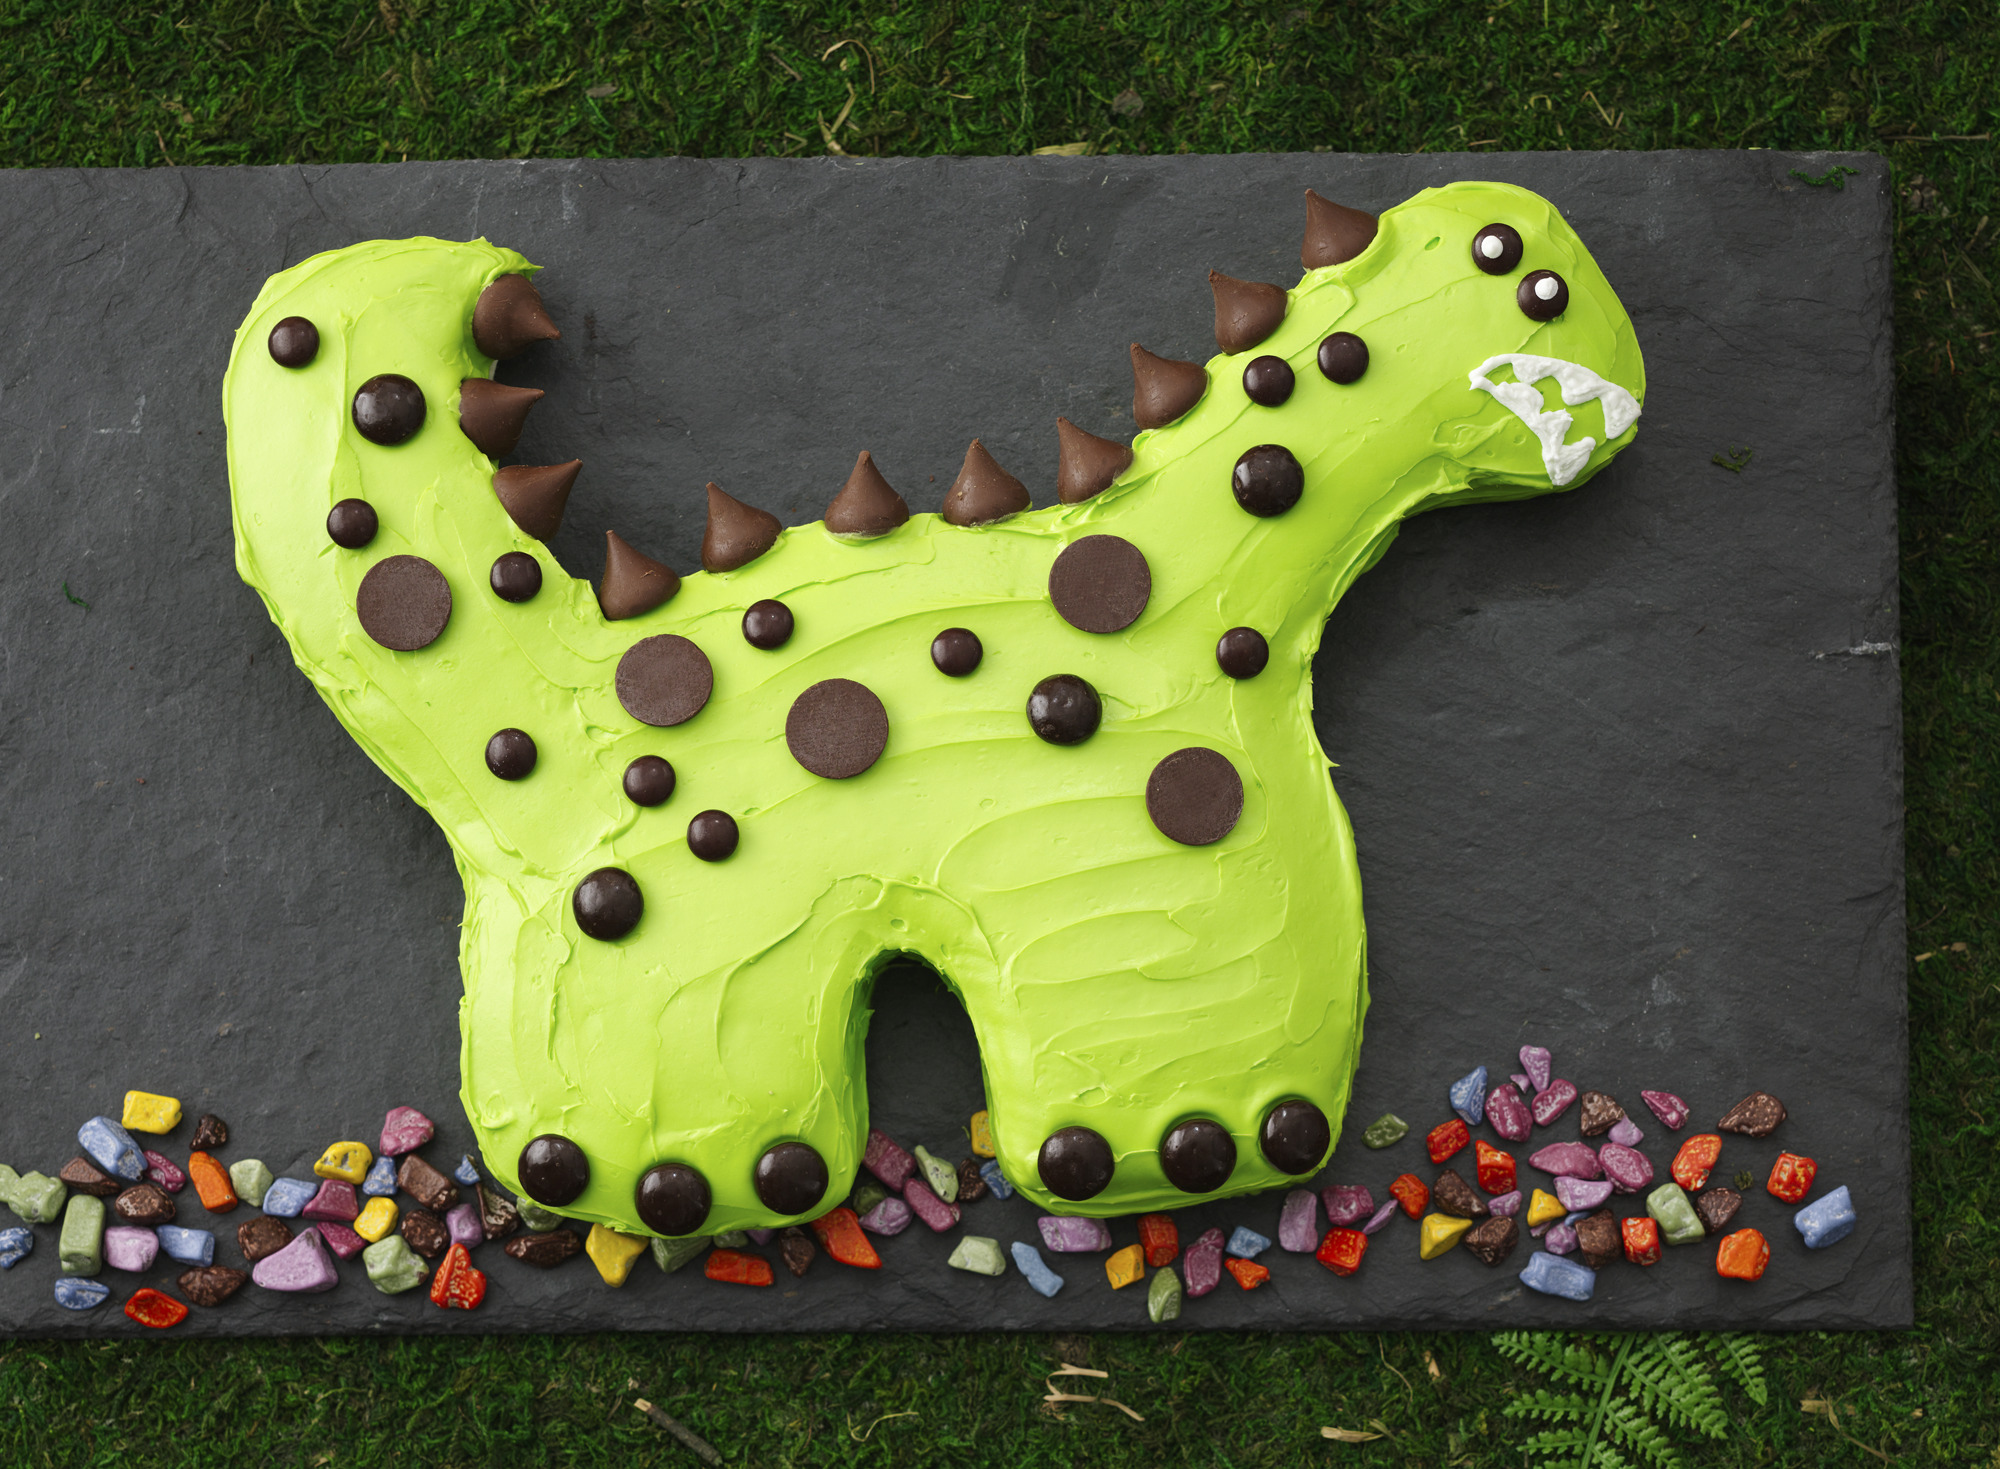 Jurassic World Dominion Dinosaurs Rule the Earth T-Rex Edible Cake Topper  Image ABPID55530 - Walmart.com